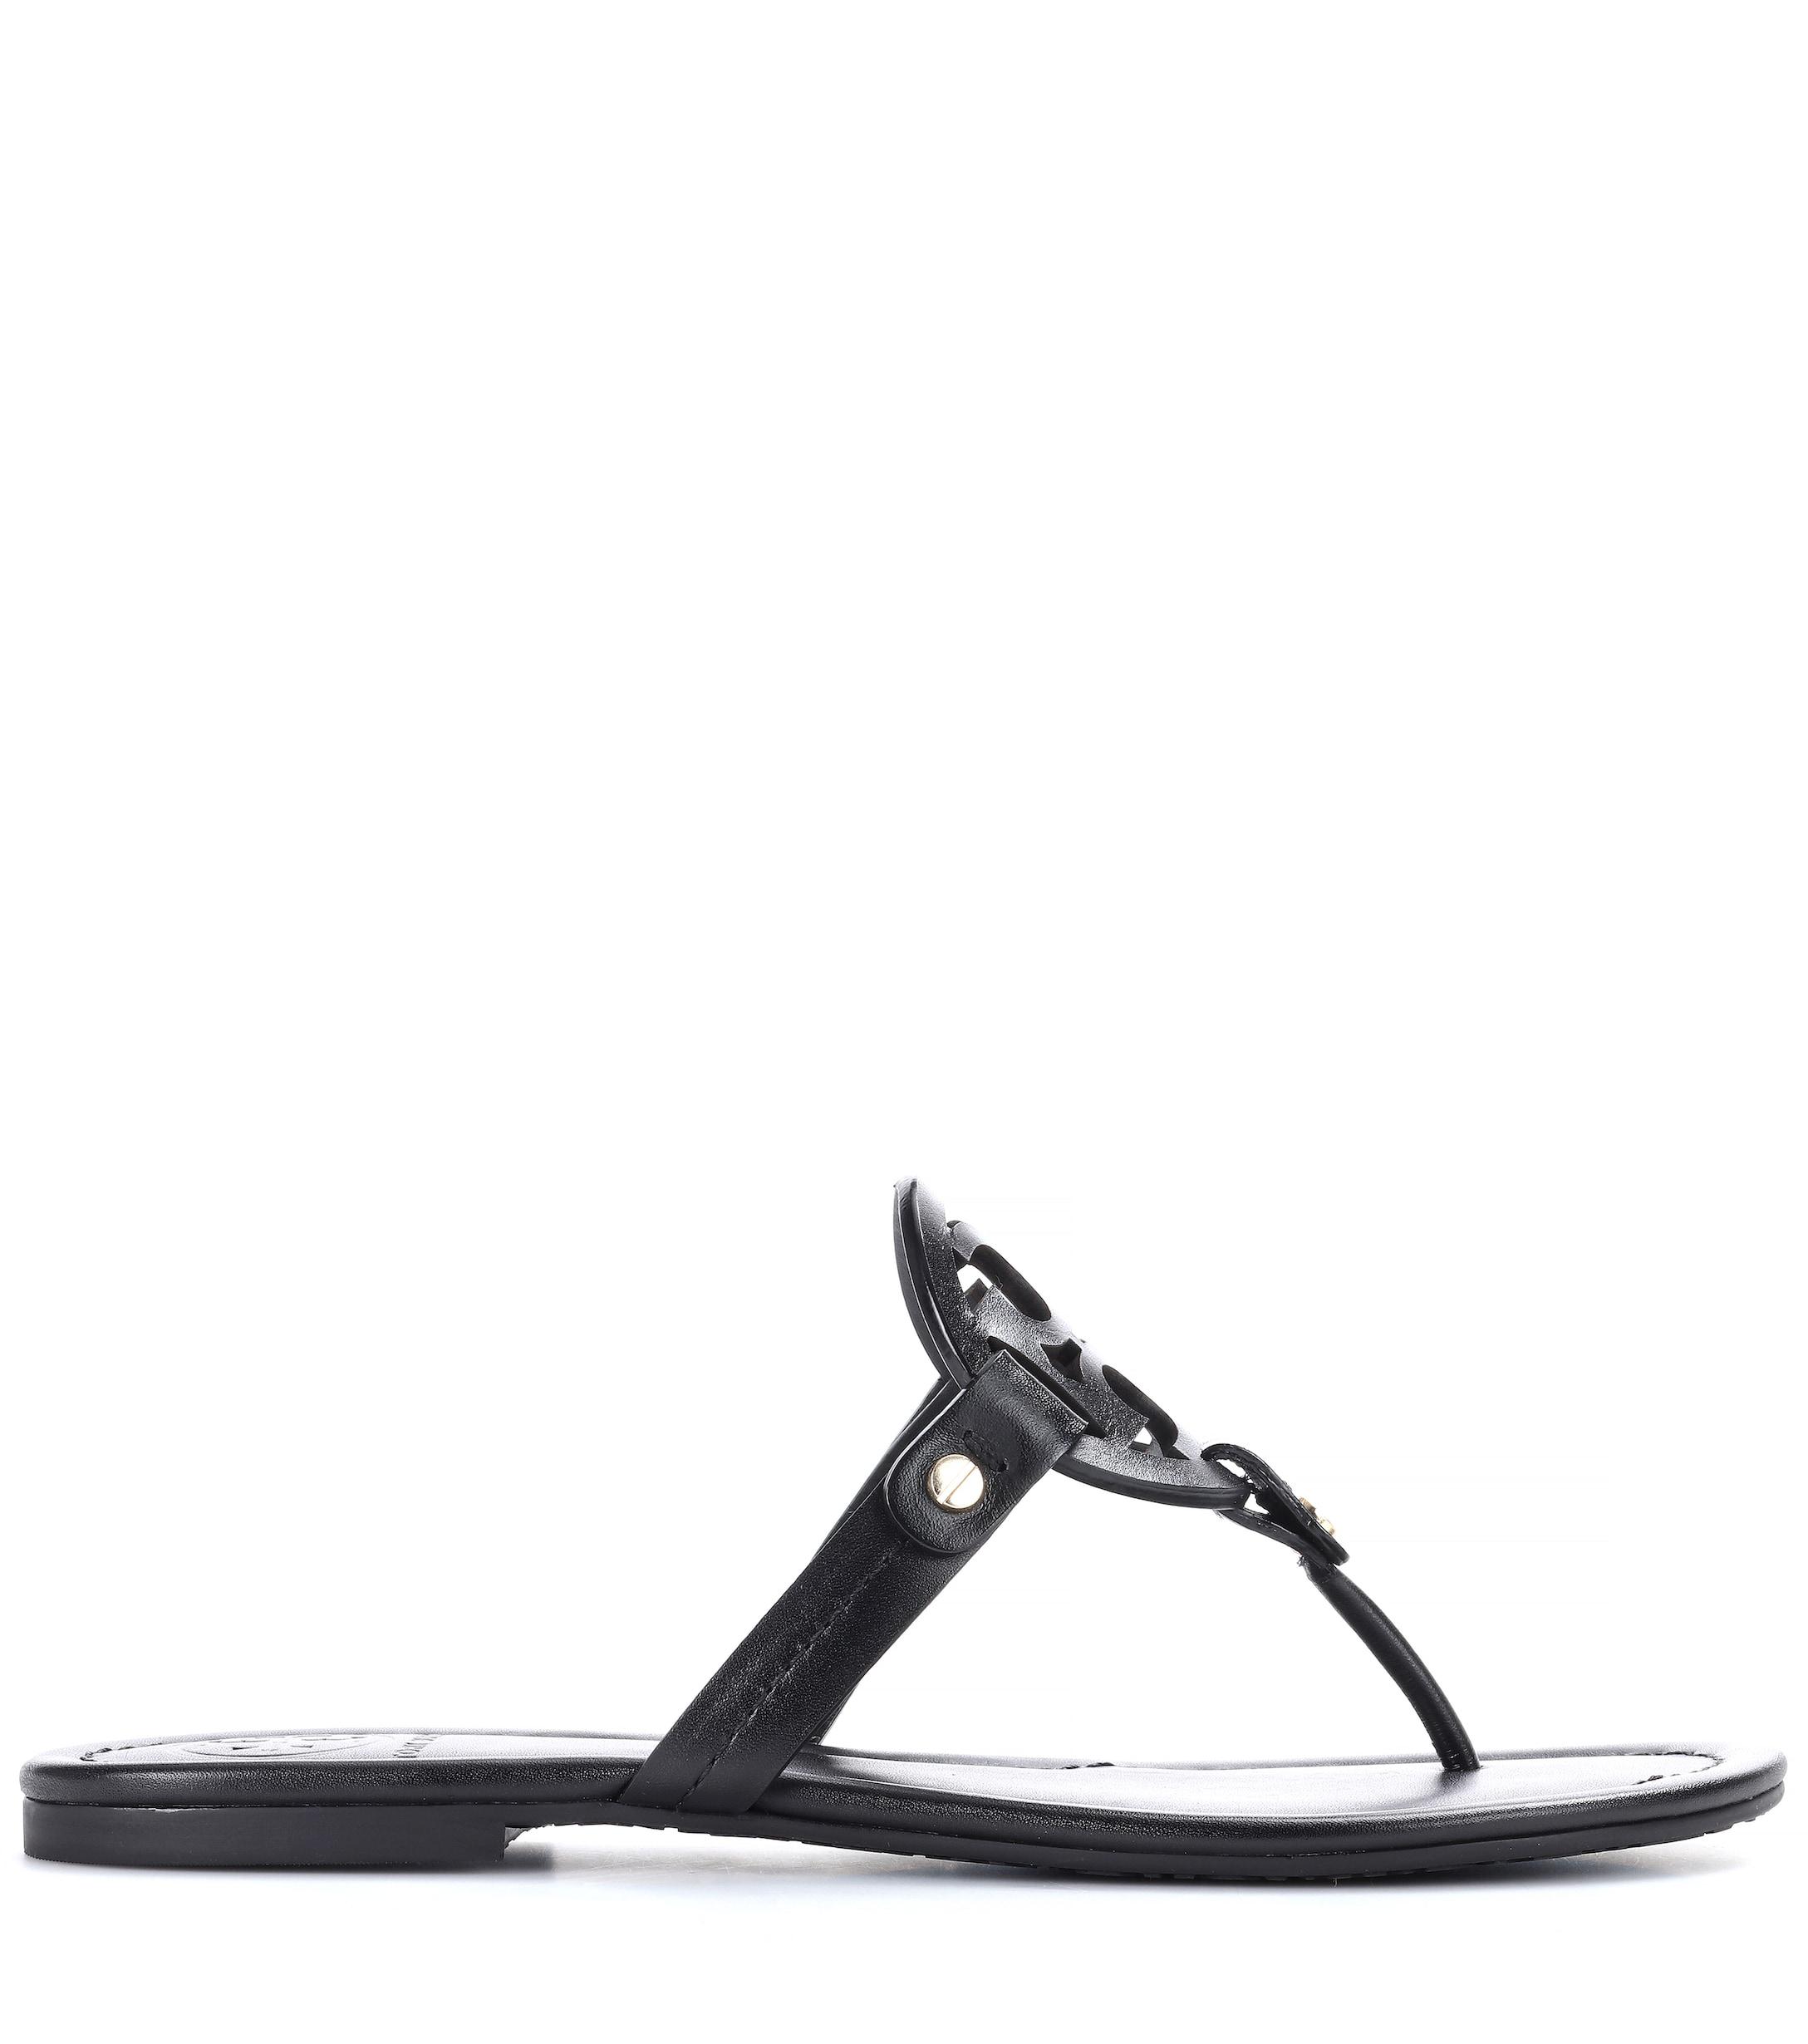 Tory Burch Miller Leather Sandals in Black - Save 25% - Lyst